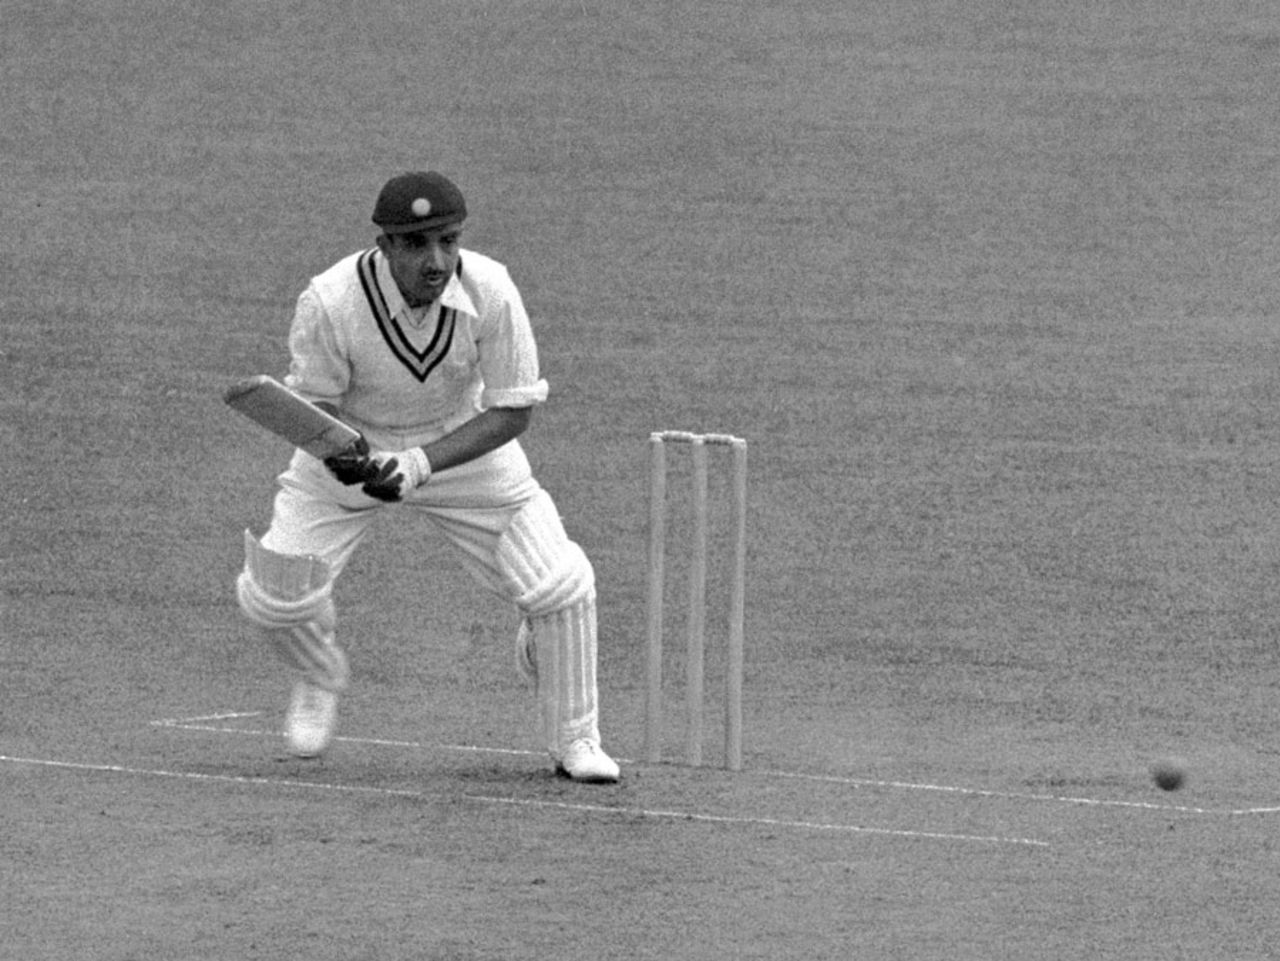 Vijay Merchant bats during India's tour of England in 1946, England v India, 1st Test, Lord's, 22 June 1946